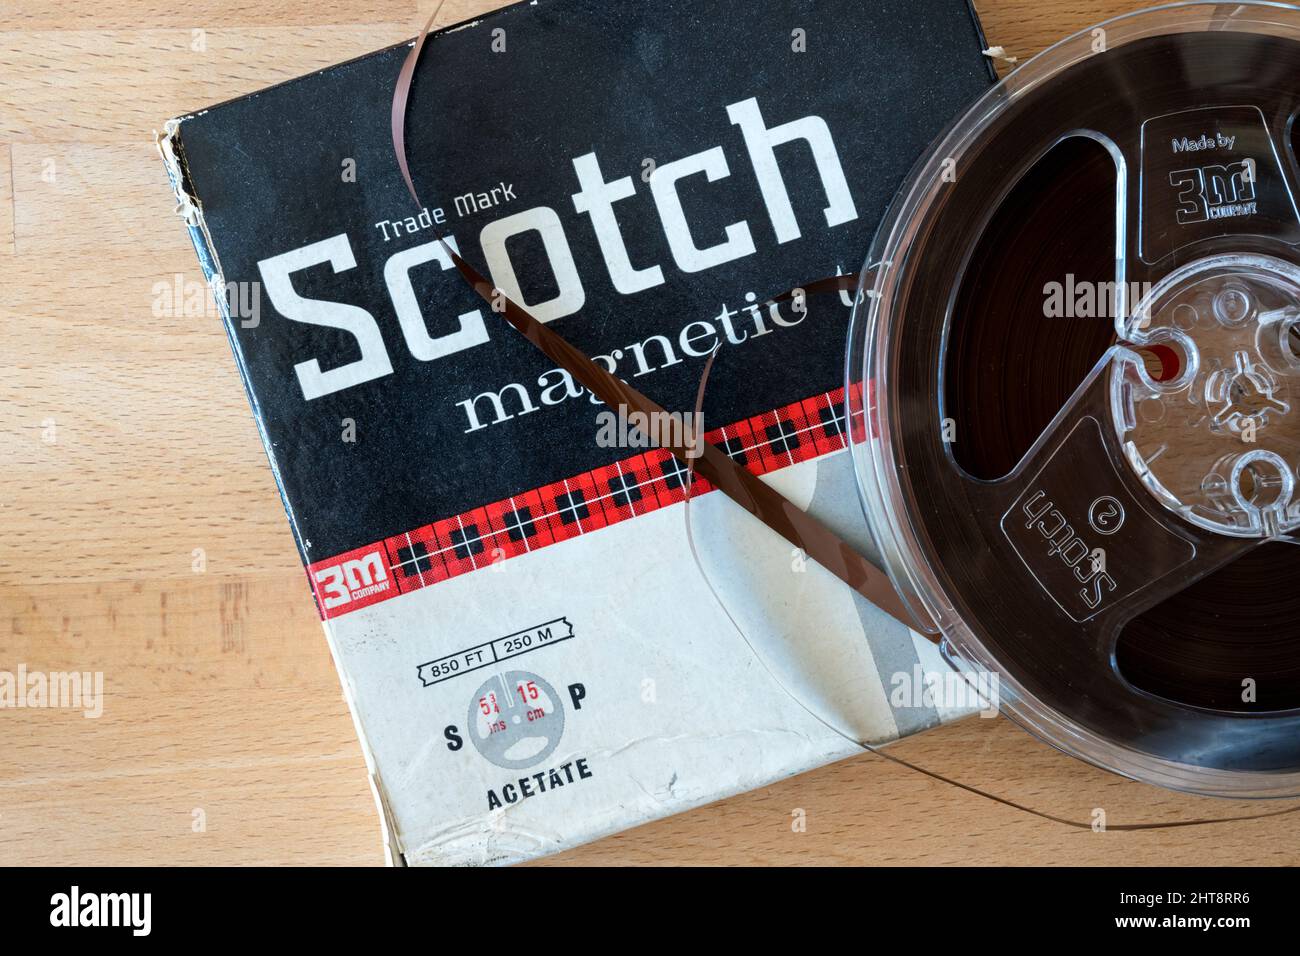 A boxed reel of Scotch Magnetic Tape for use in a reel to reel tape recorder. Stock Photo